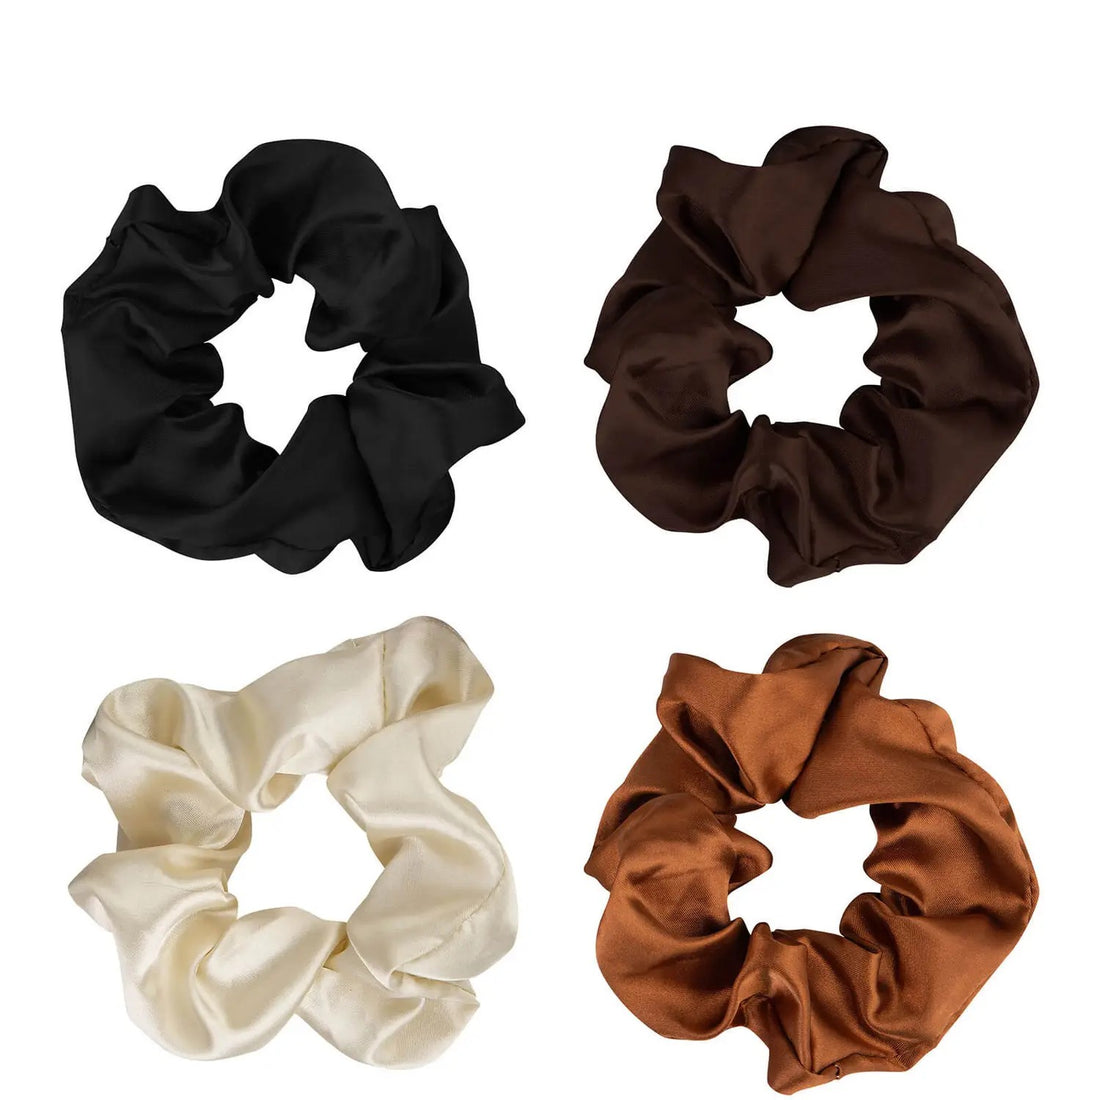 Brushworks Nude Satin Scrunchies Pack of 4